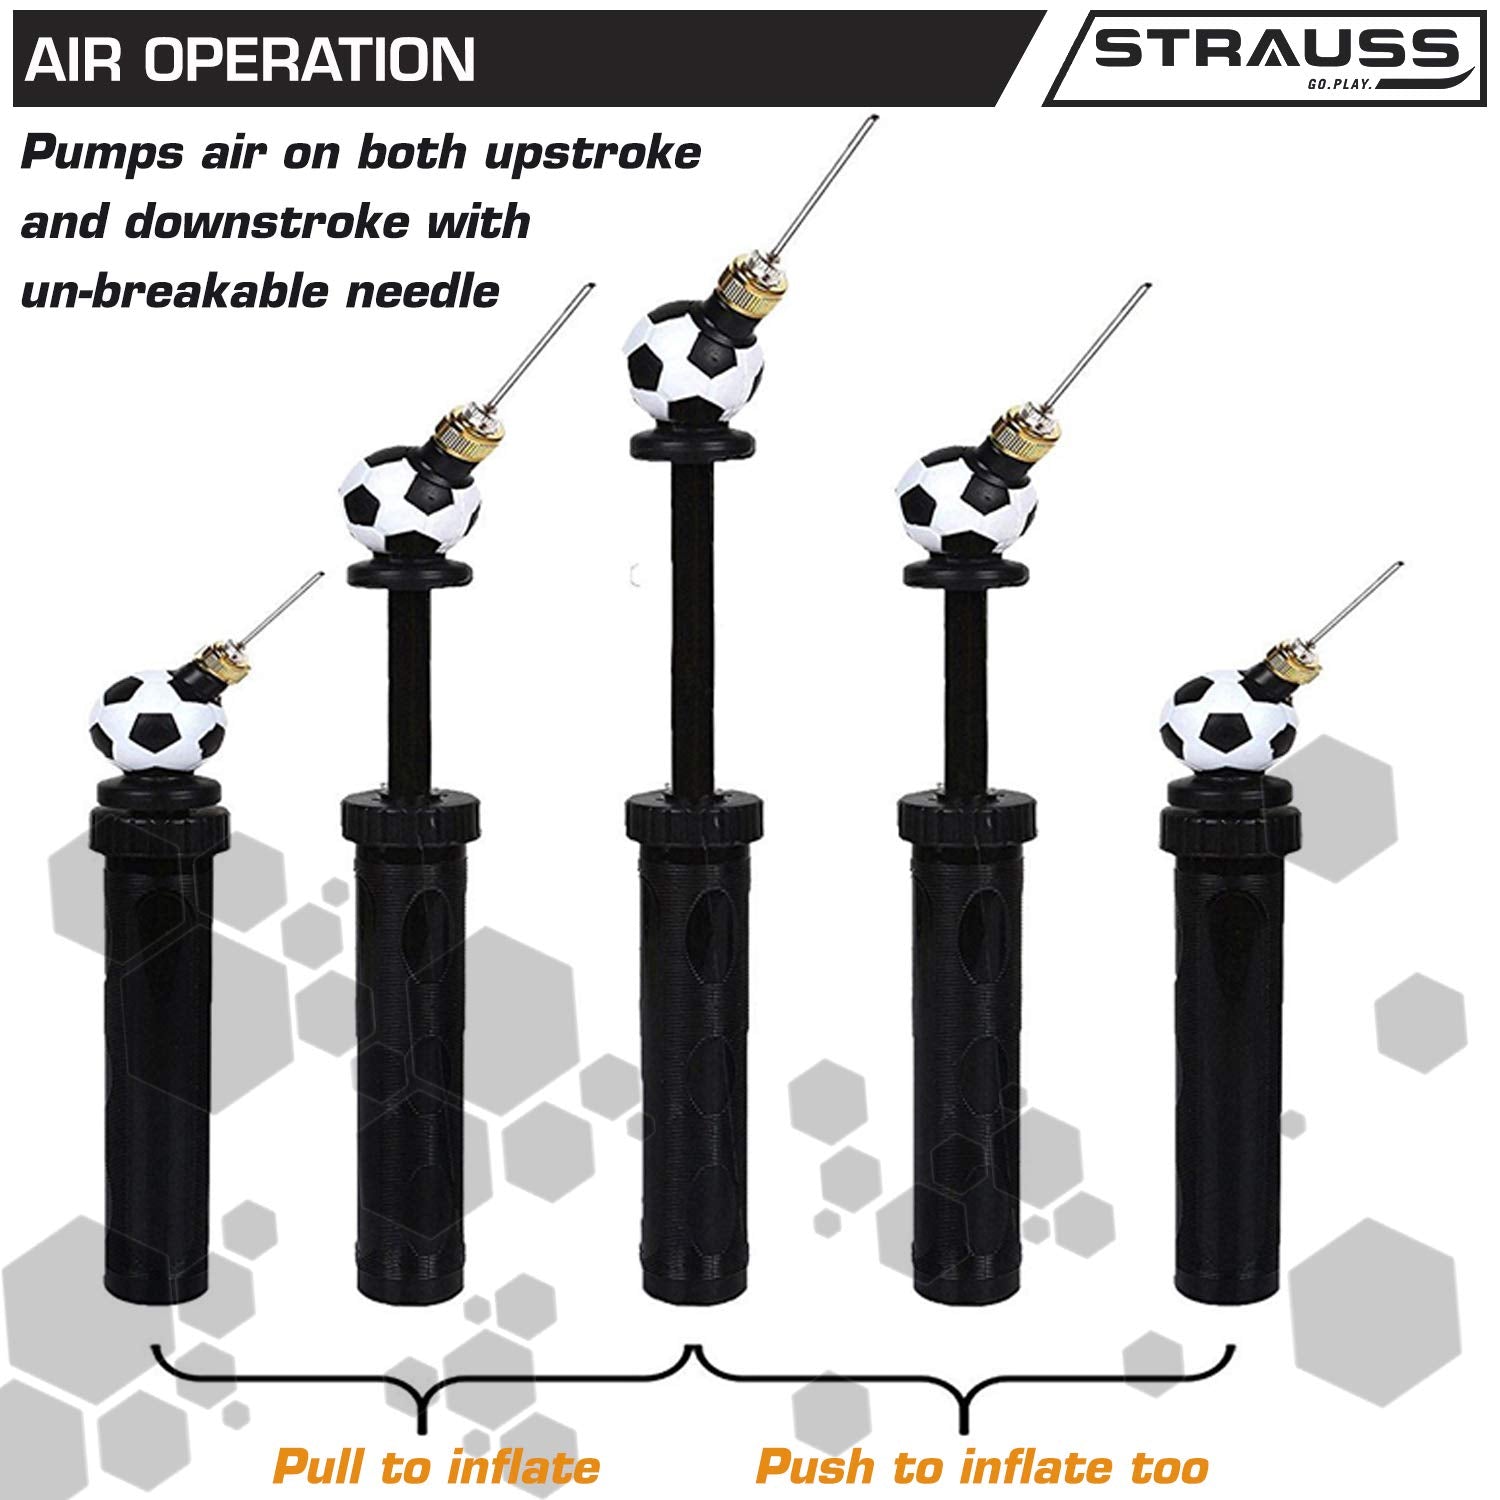 Strauss Ball Pump Double Action